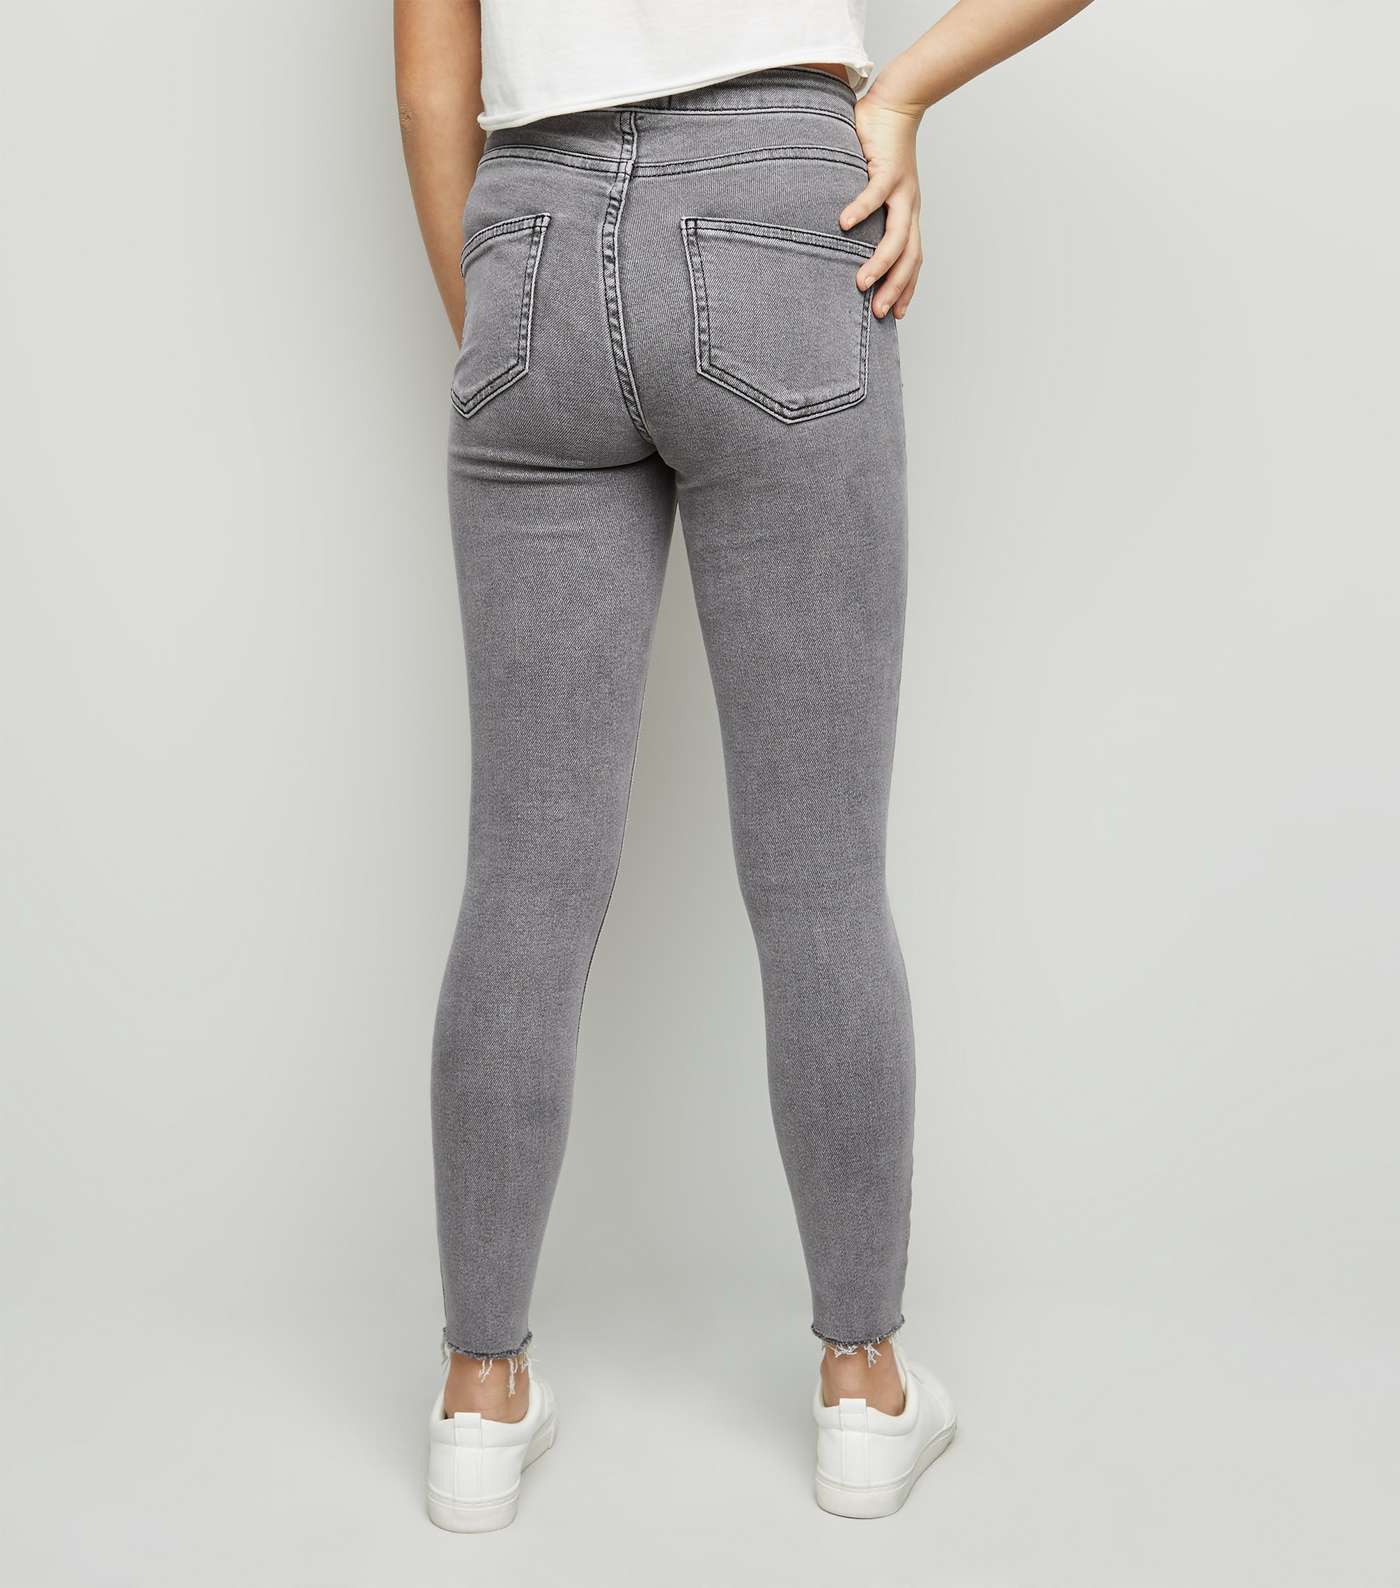 Girls Grey Ripped High Rise Skinny Jeans  Image 3